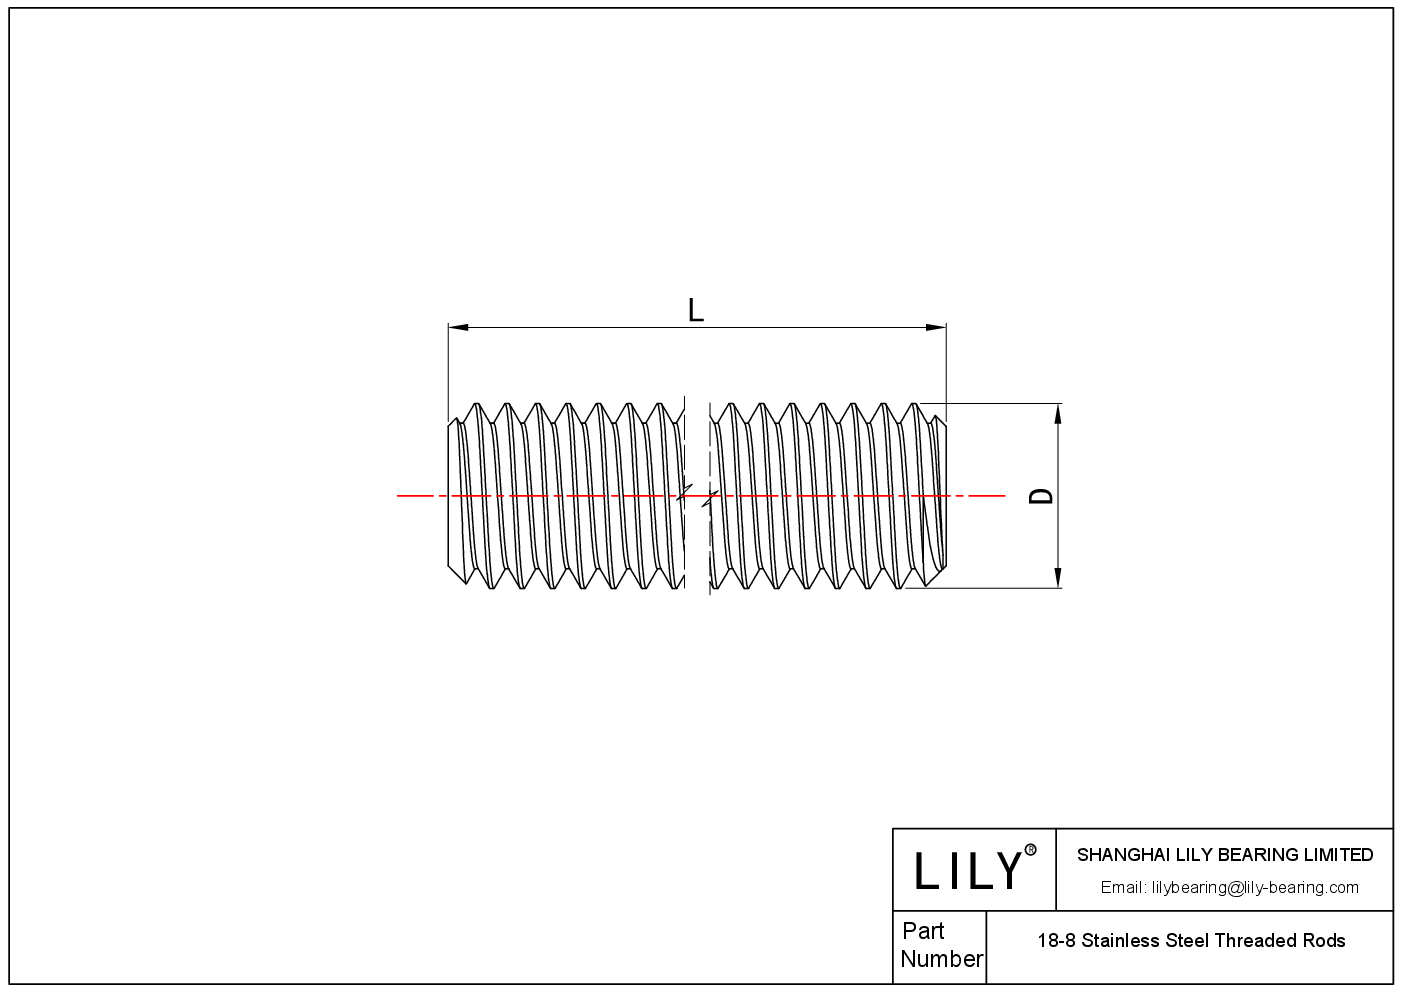 JFEBCADHF 18-8 Stainless Steel Threaded Rods cad drawing